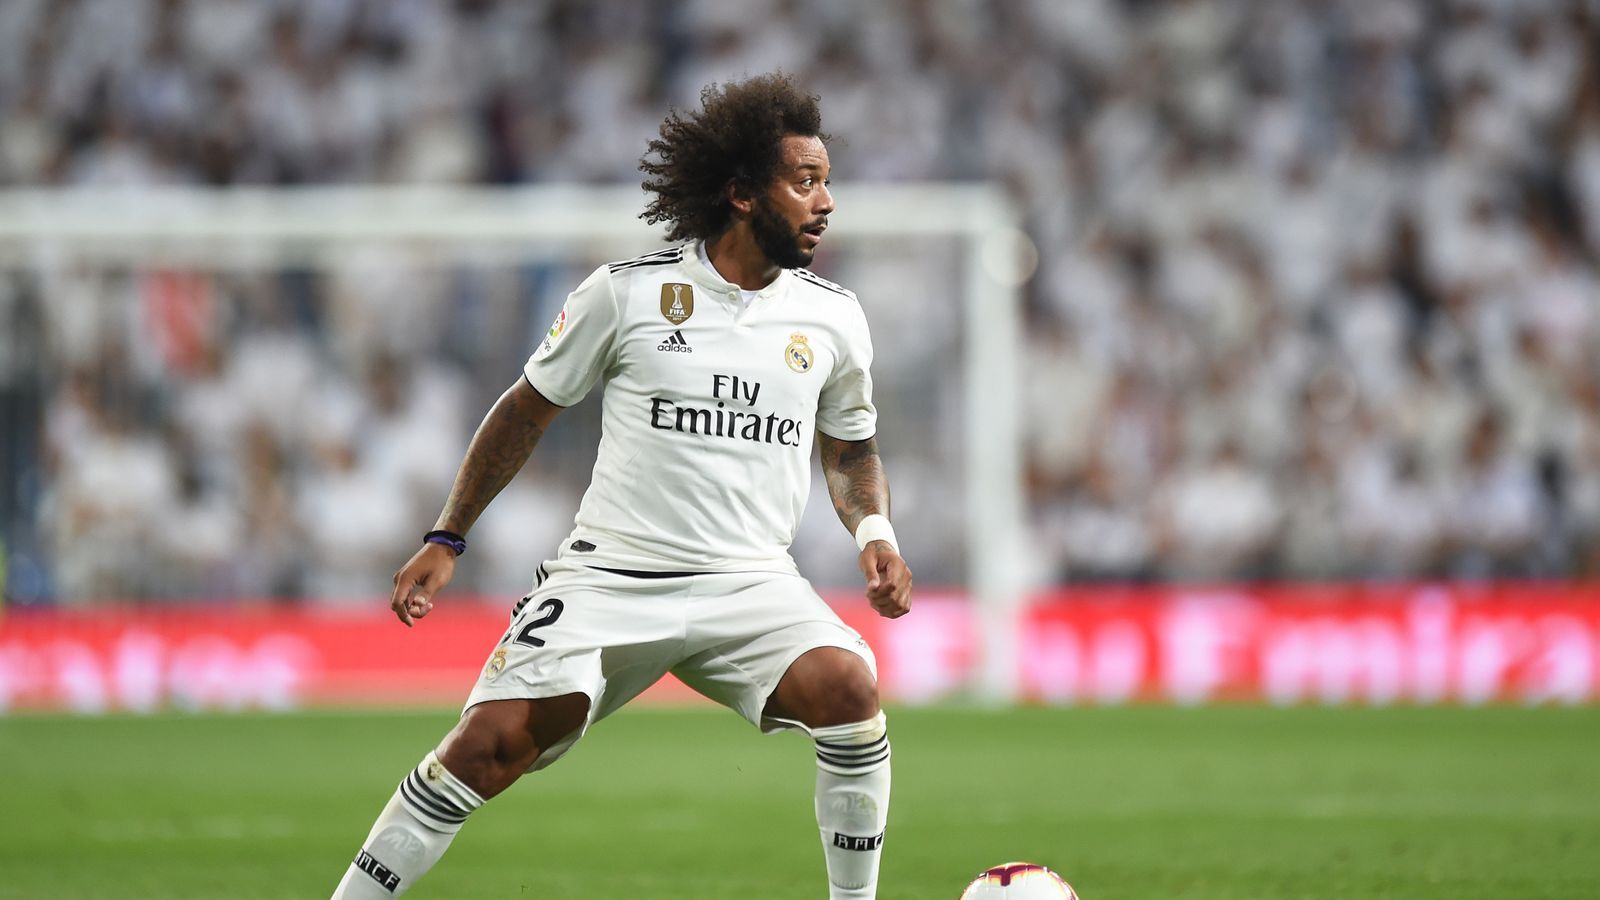 Marcelo Took a Knee to Show Solidarity for Black Lives Matter Movement after Scoring